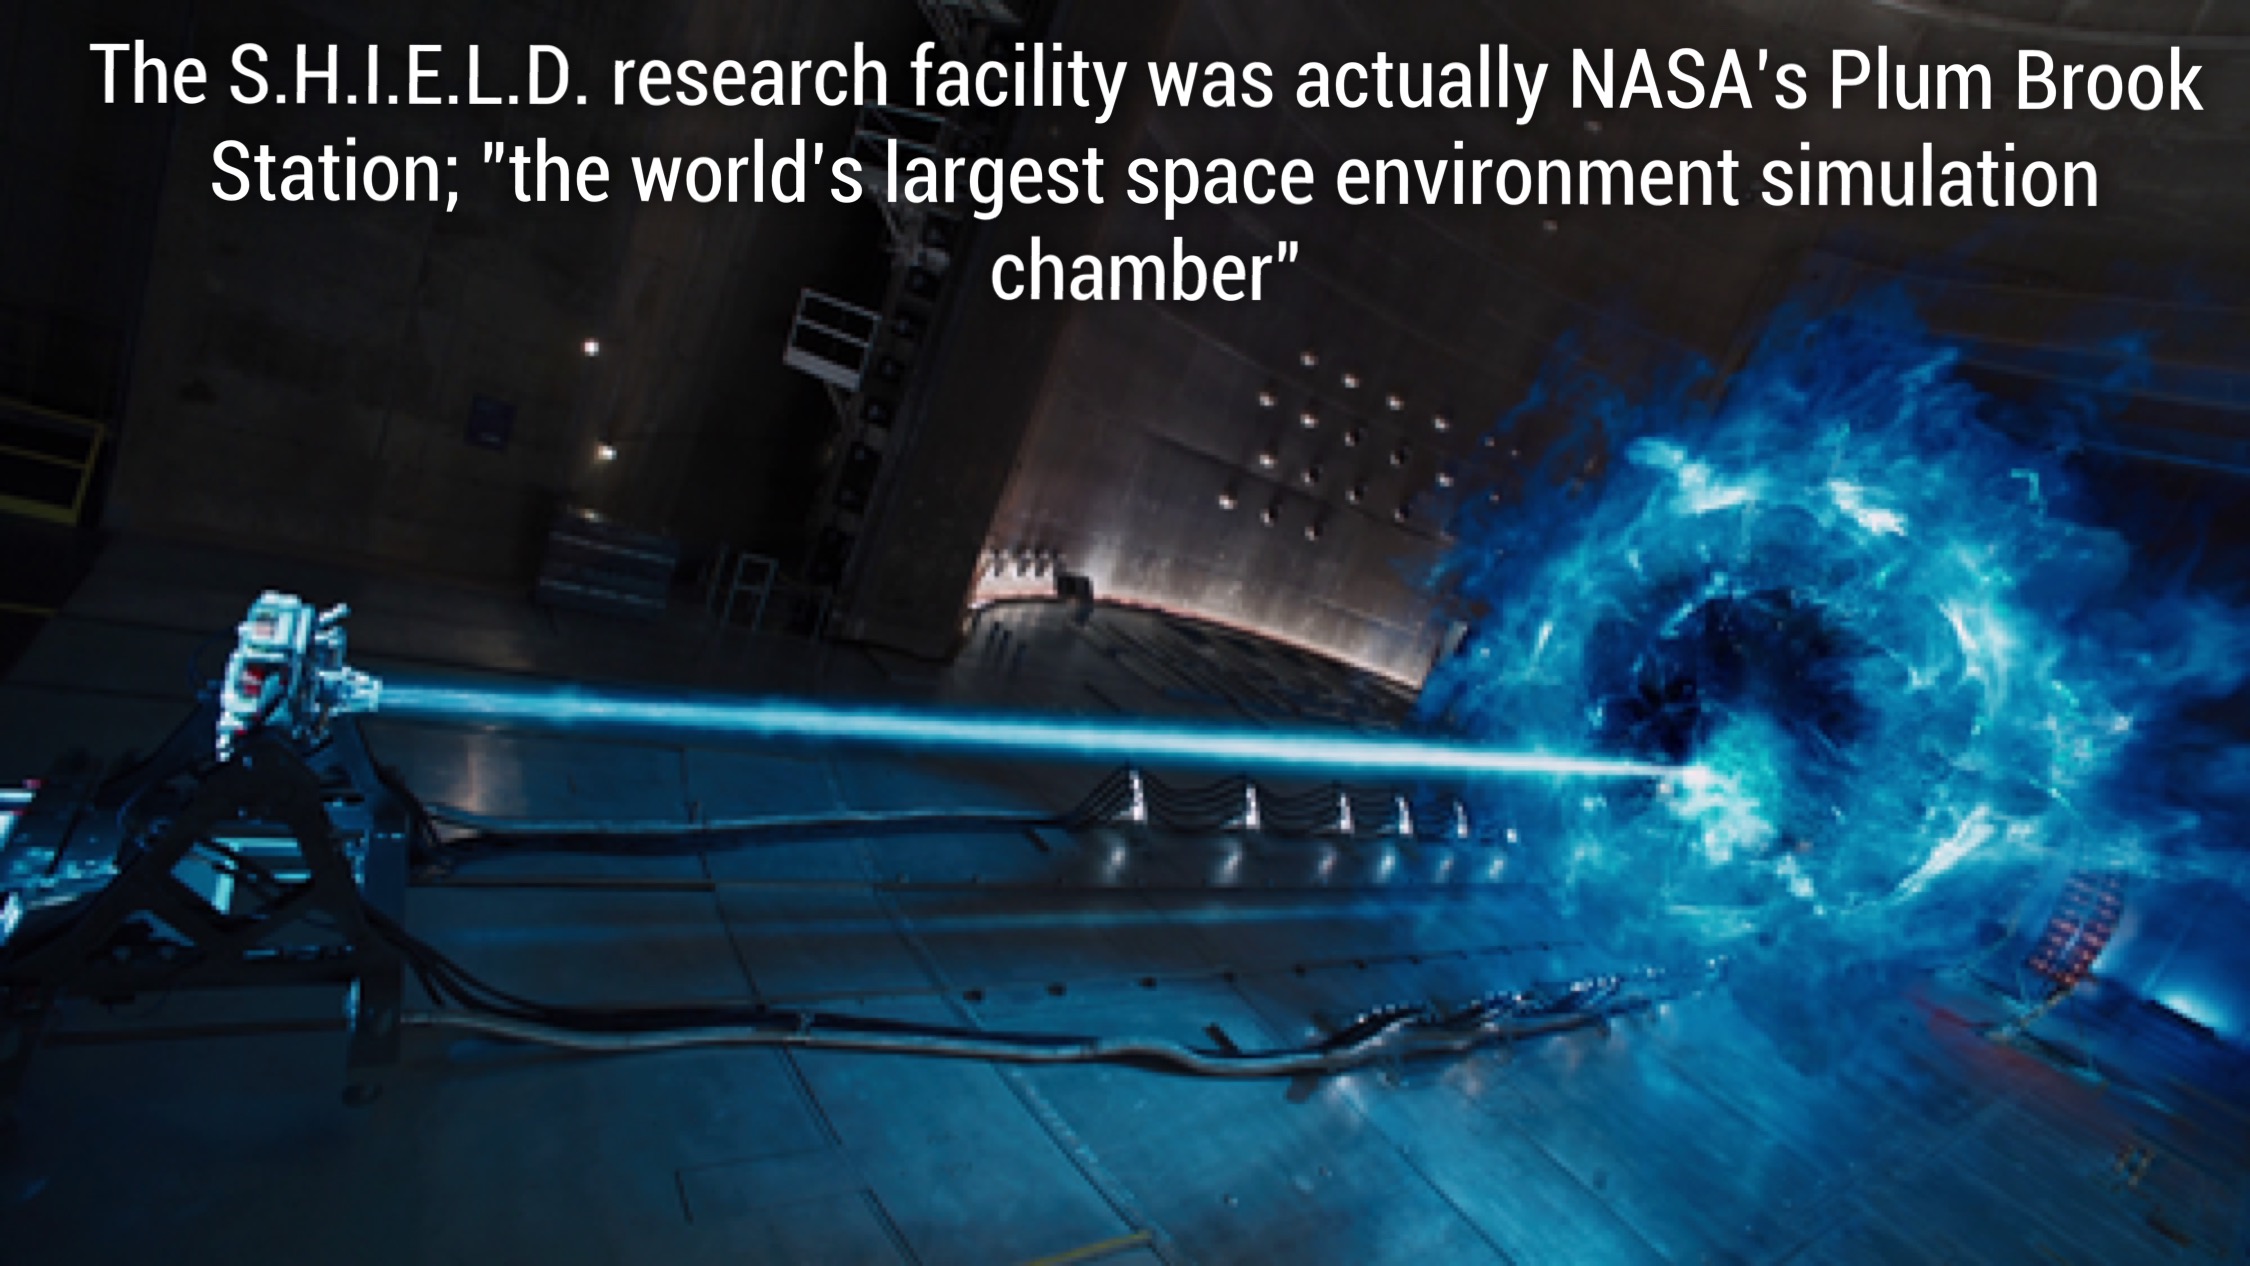 avengers tesseract - The S.H.I.E.L.D. research facility was actually Nasa's Plum Brook Station; "the world's largest space environment simulation chamber"